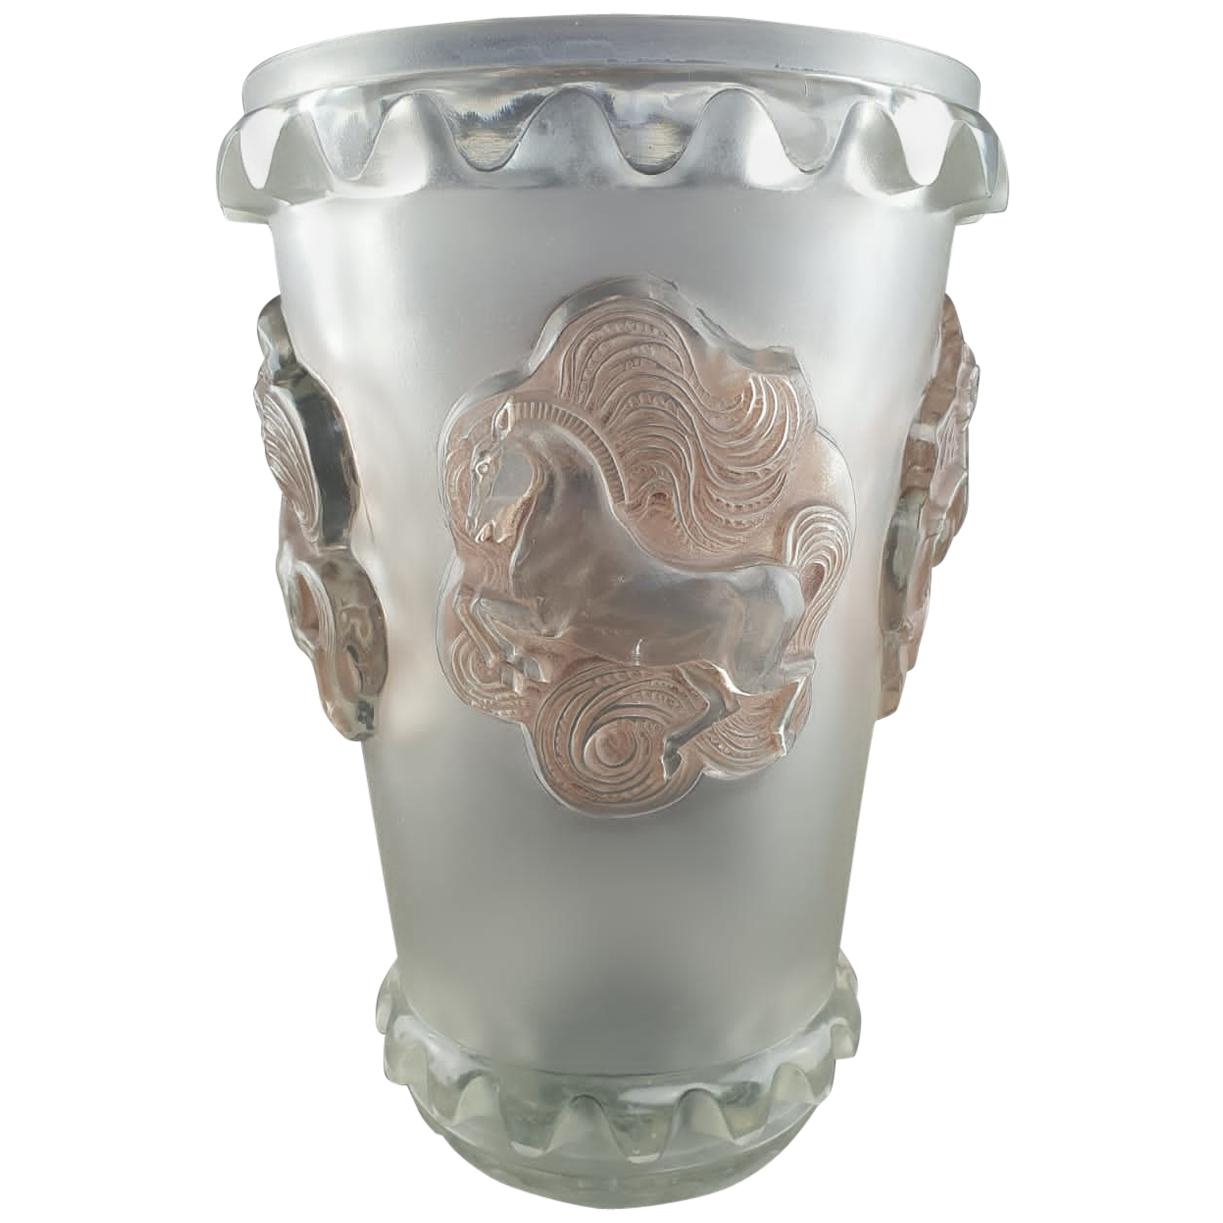 1942 René Lalique Camargue Vase in Frosted Glass with Sepia Patina